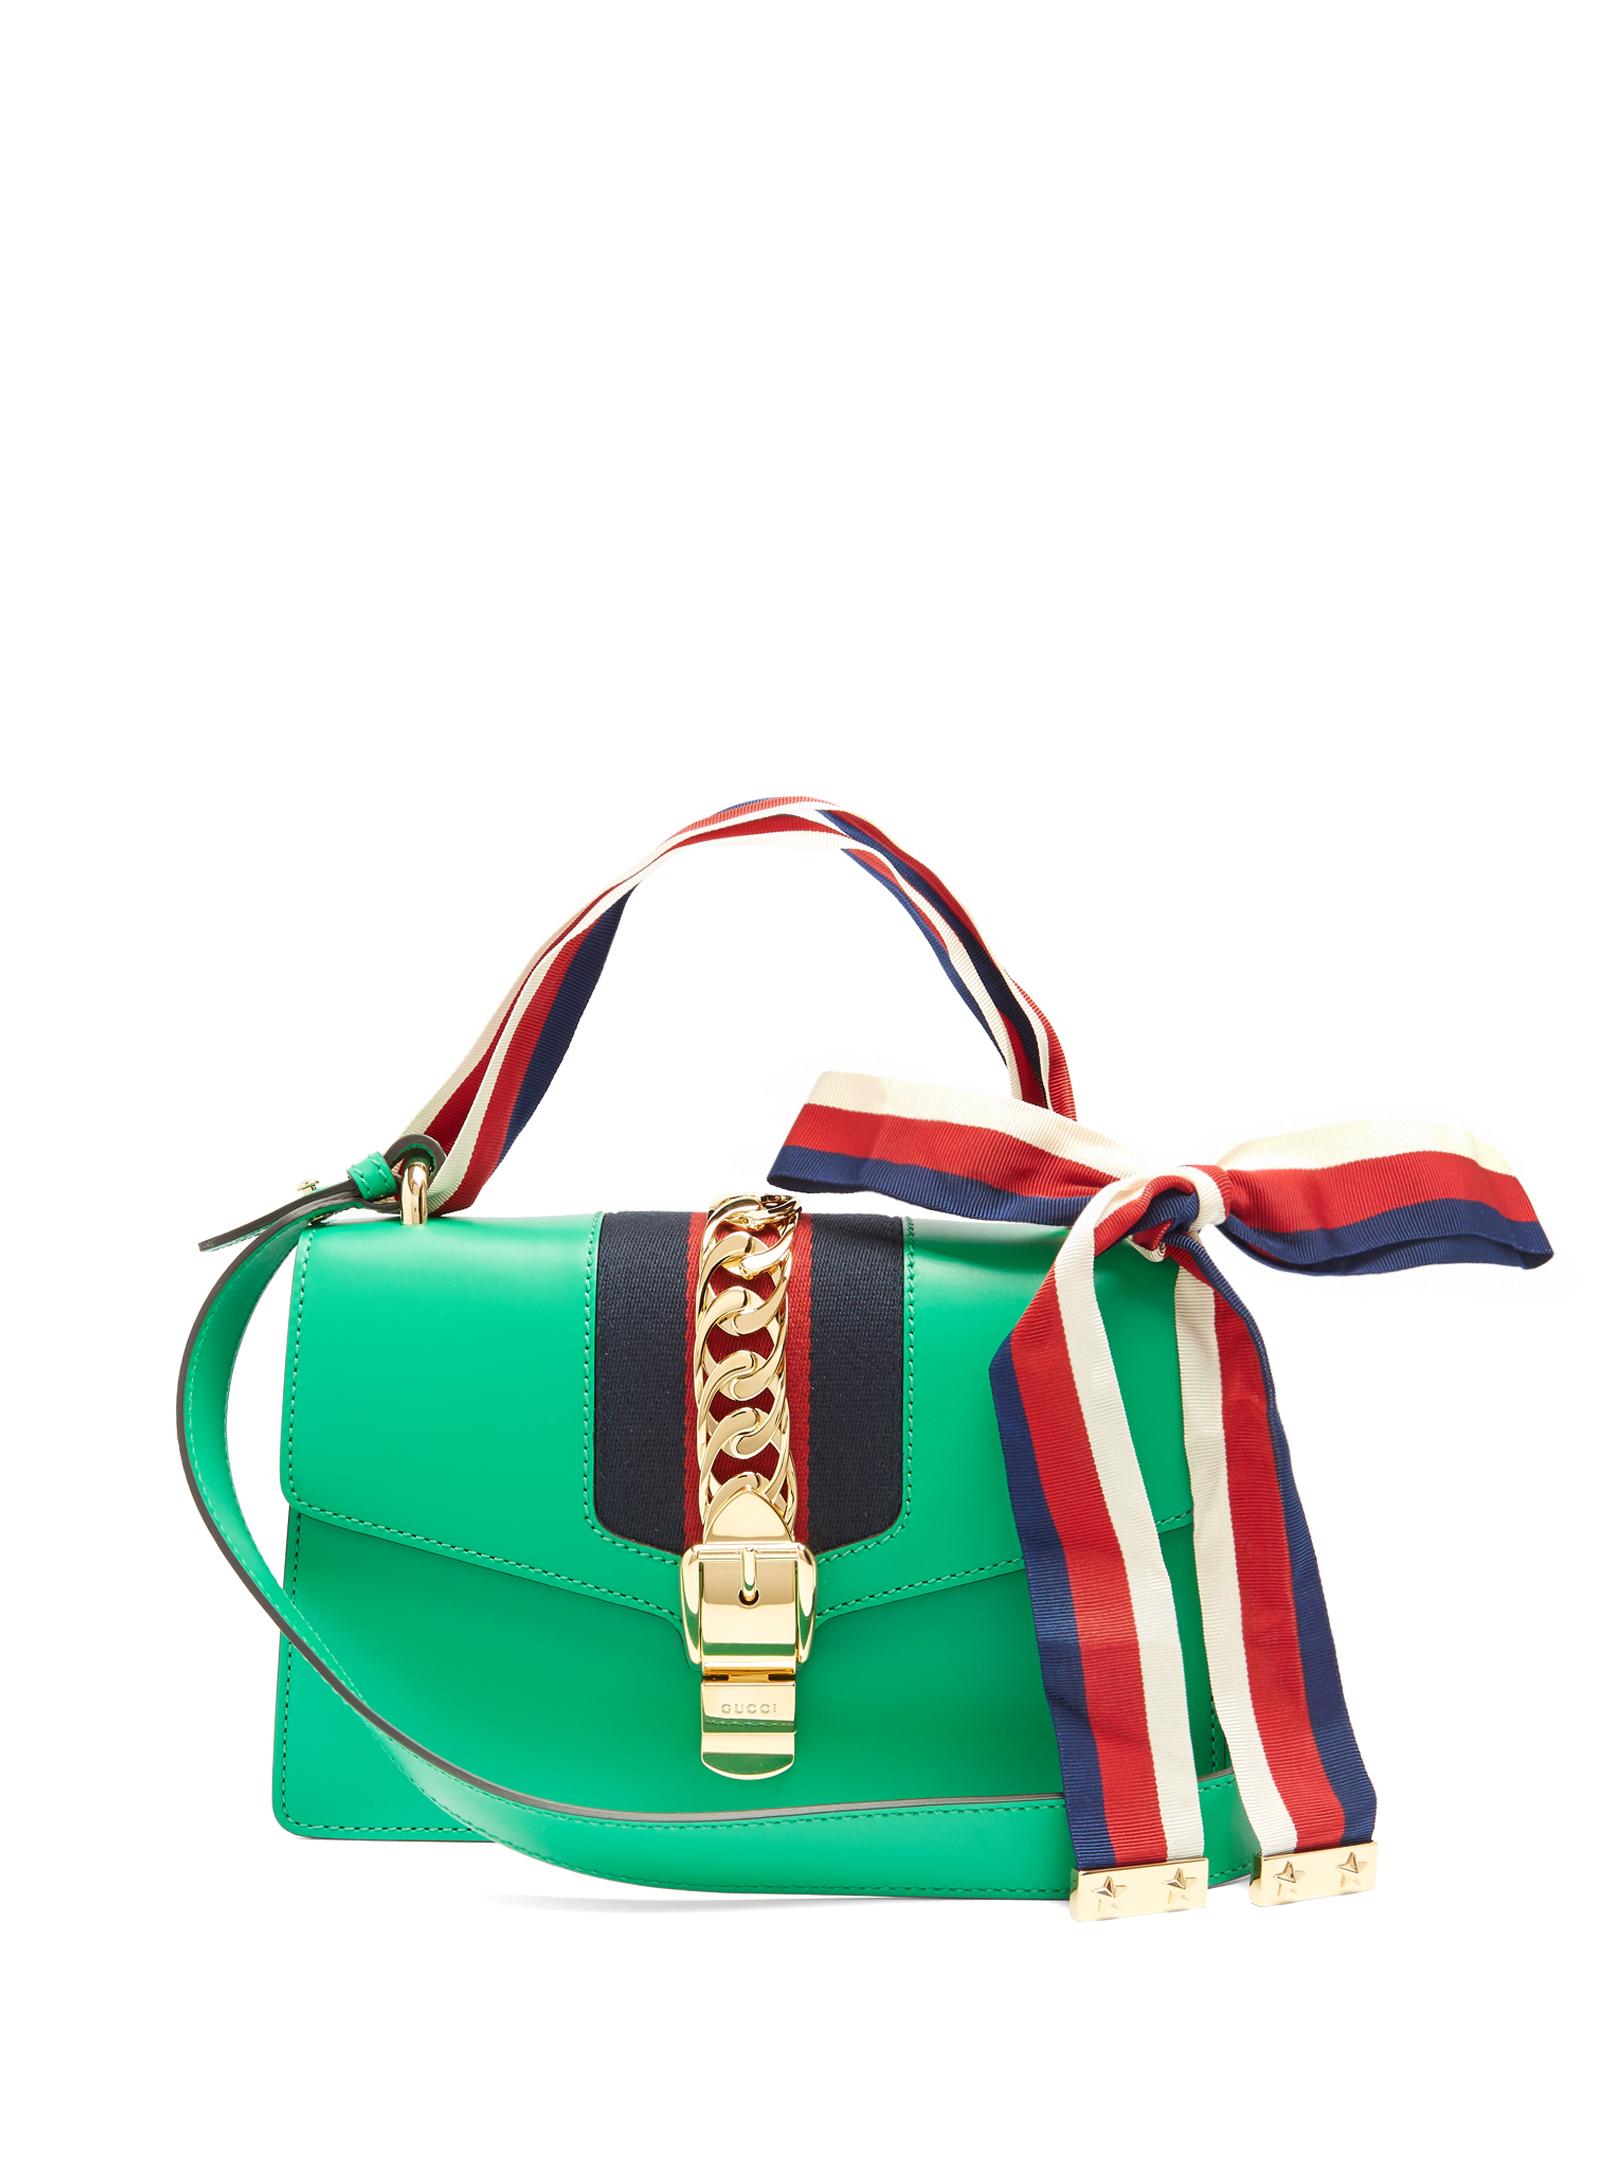 Gucci Sylvie Leather Shoulder Bag in Green | Lyst